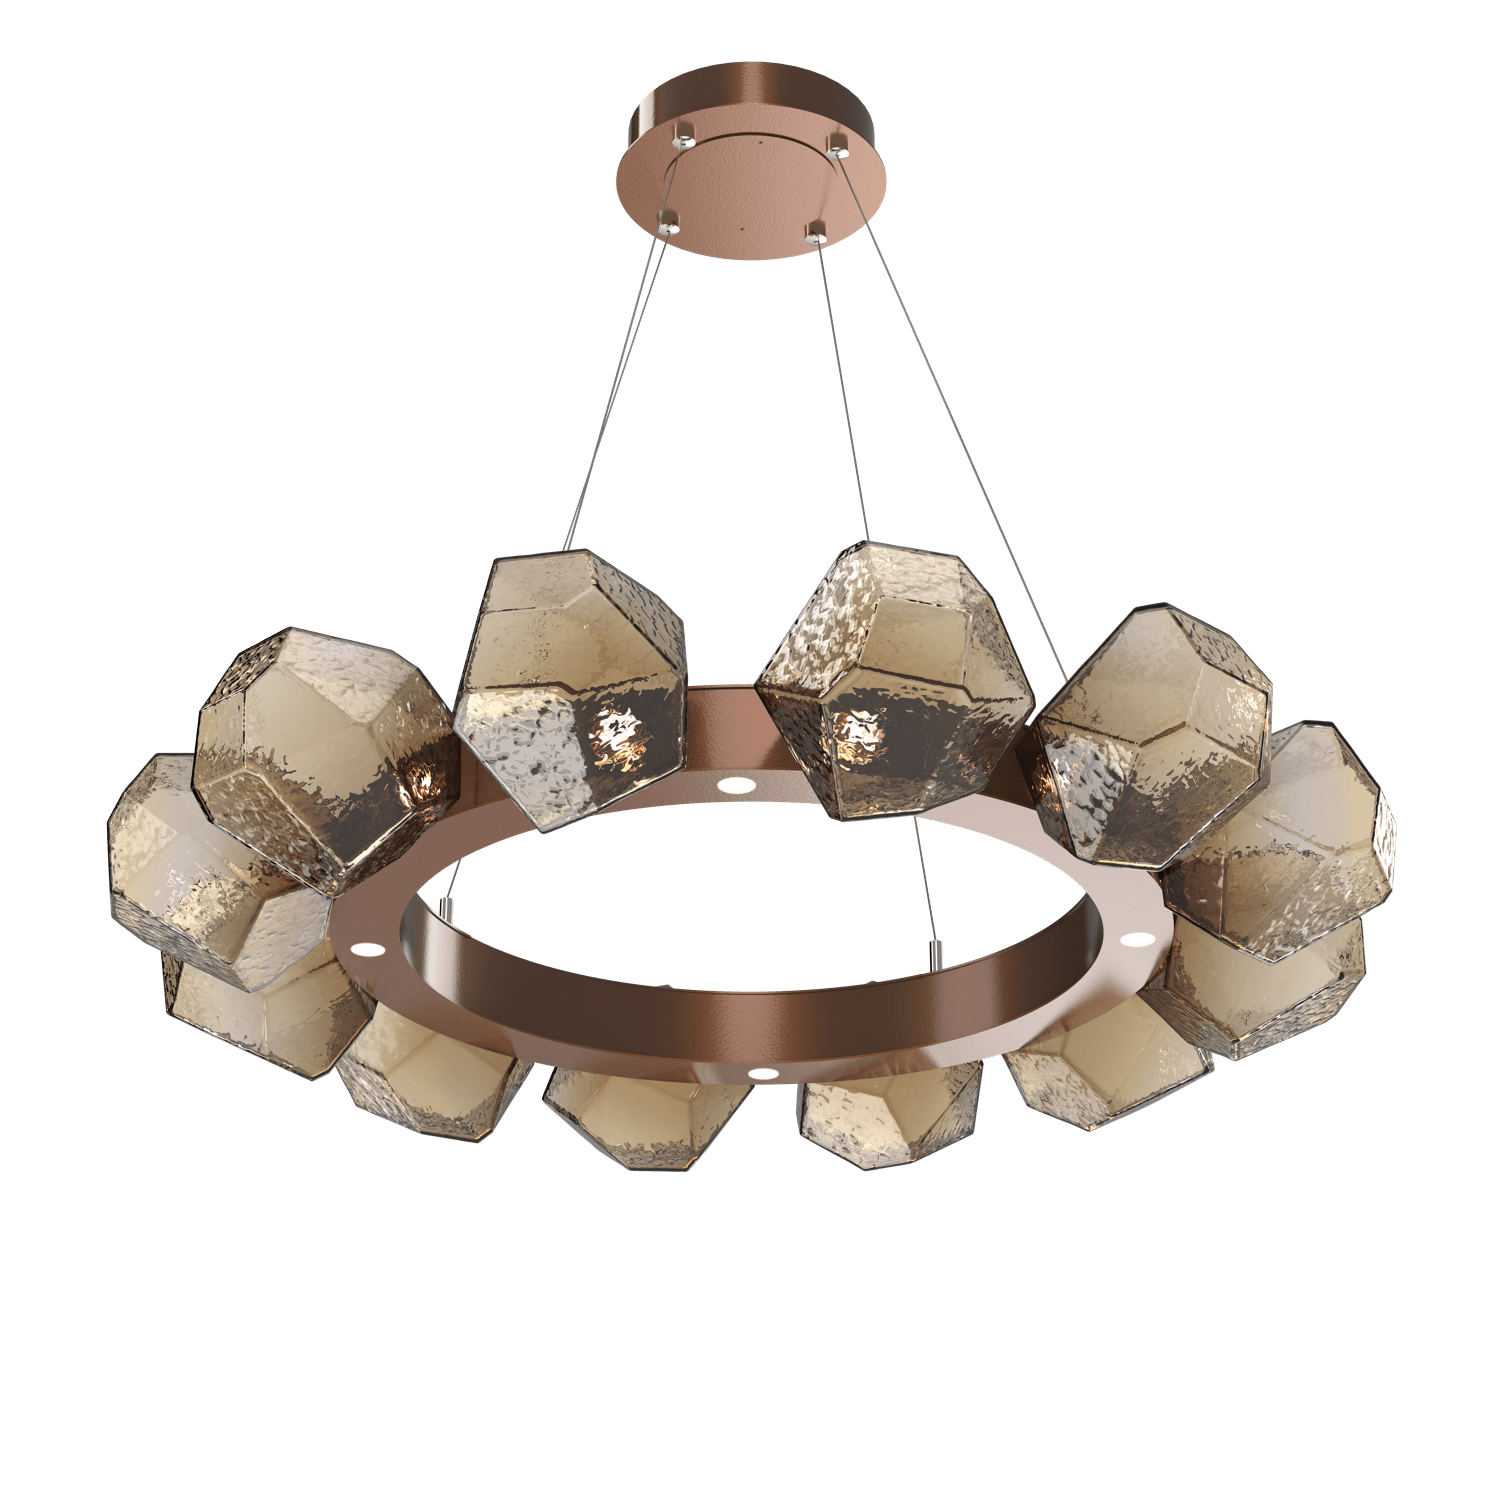 CHB0039-36-BB-B-Hammerton-Studio-Gem-36-inch-radial-ring-chandelier-with-burnished-bronze-finish-and-bronze-blown-glass-shades-and-LED-lamping